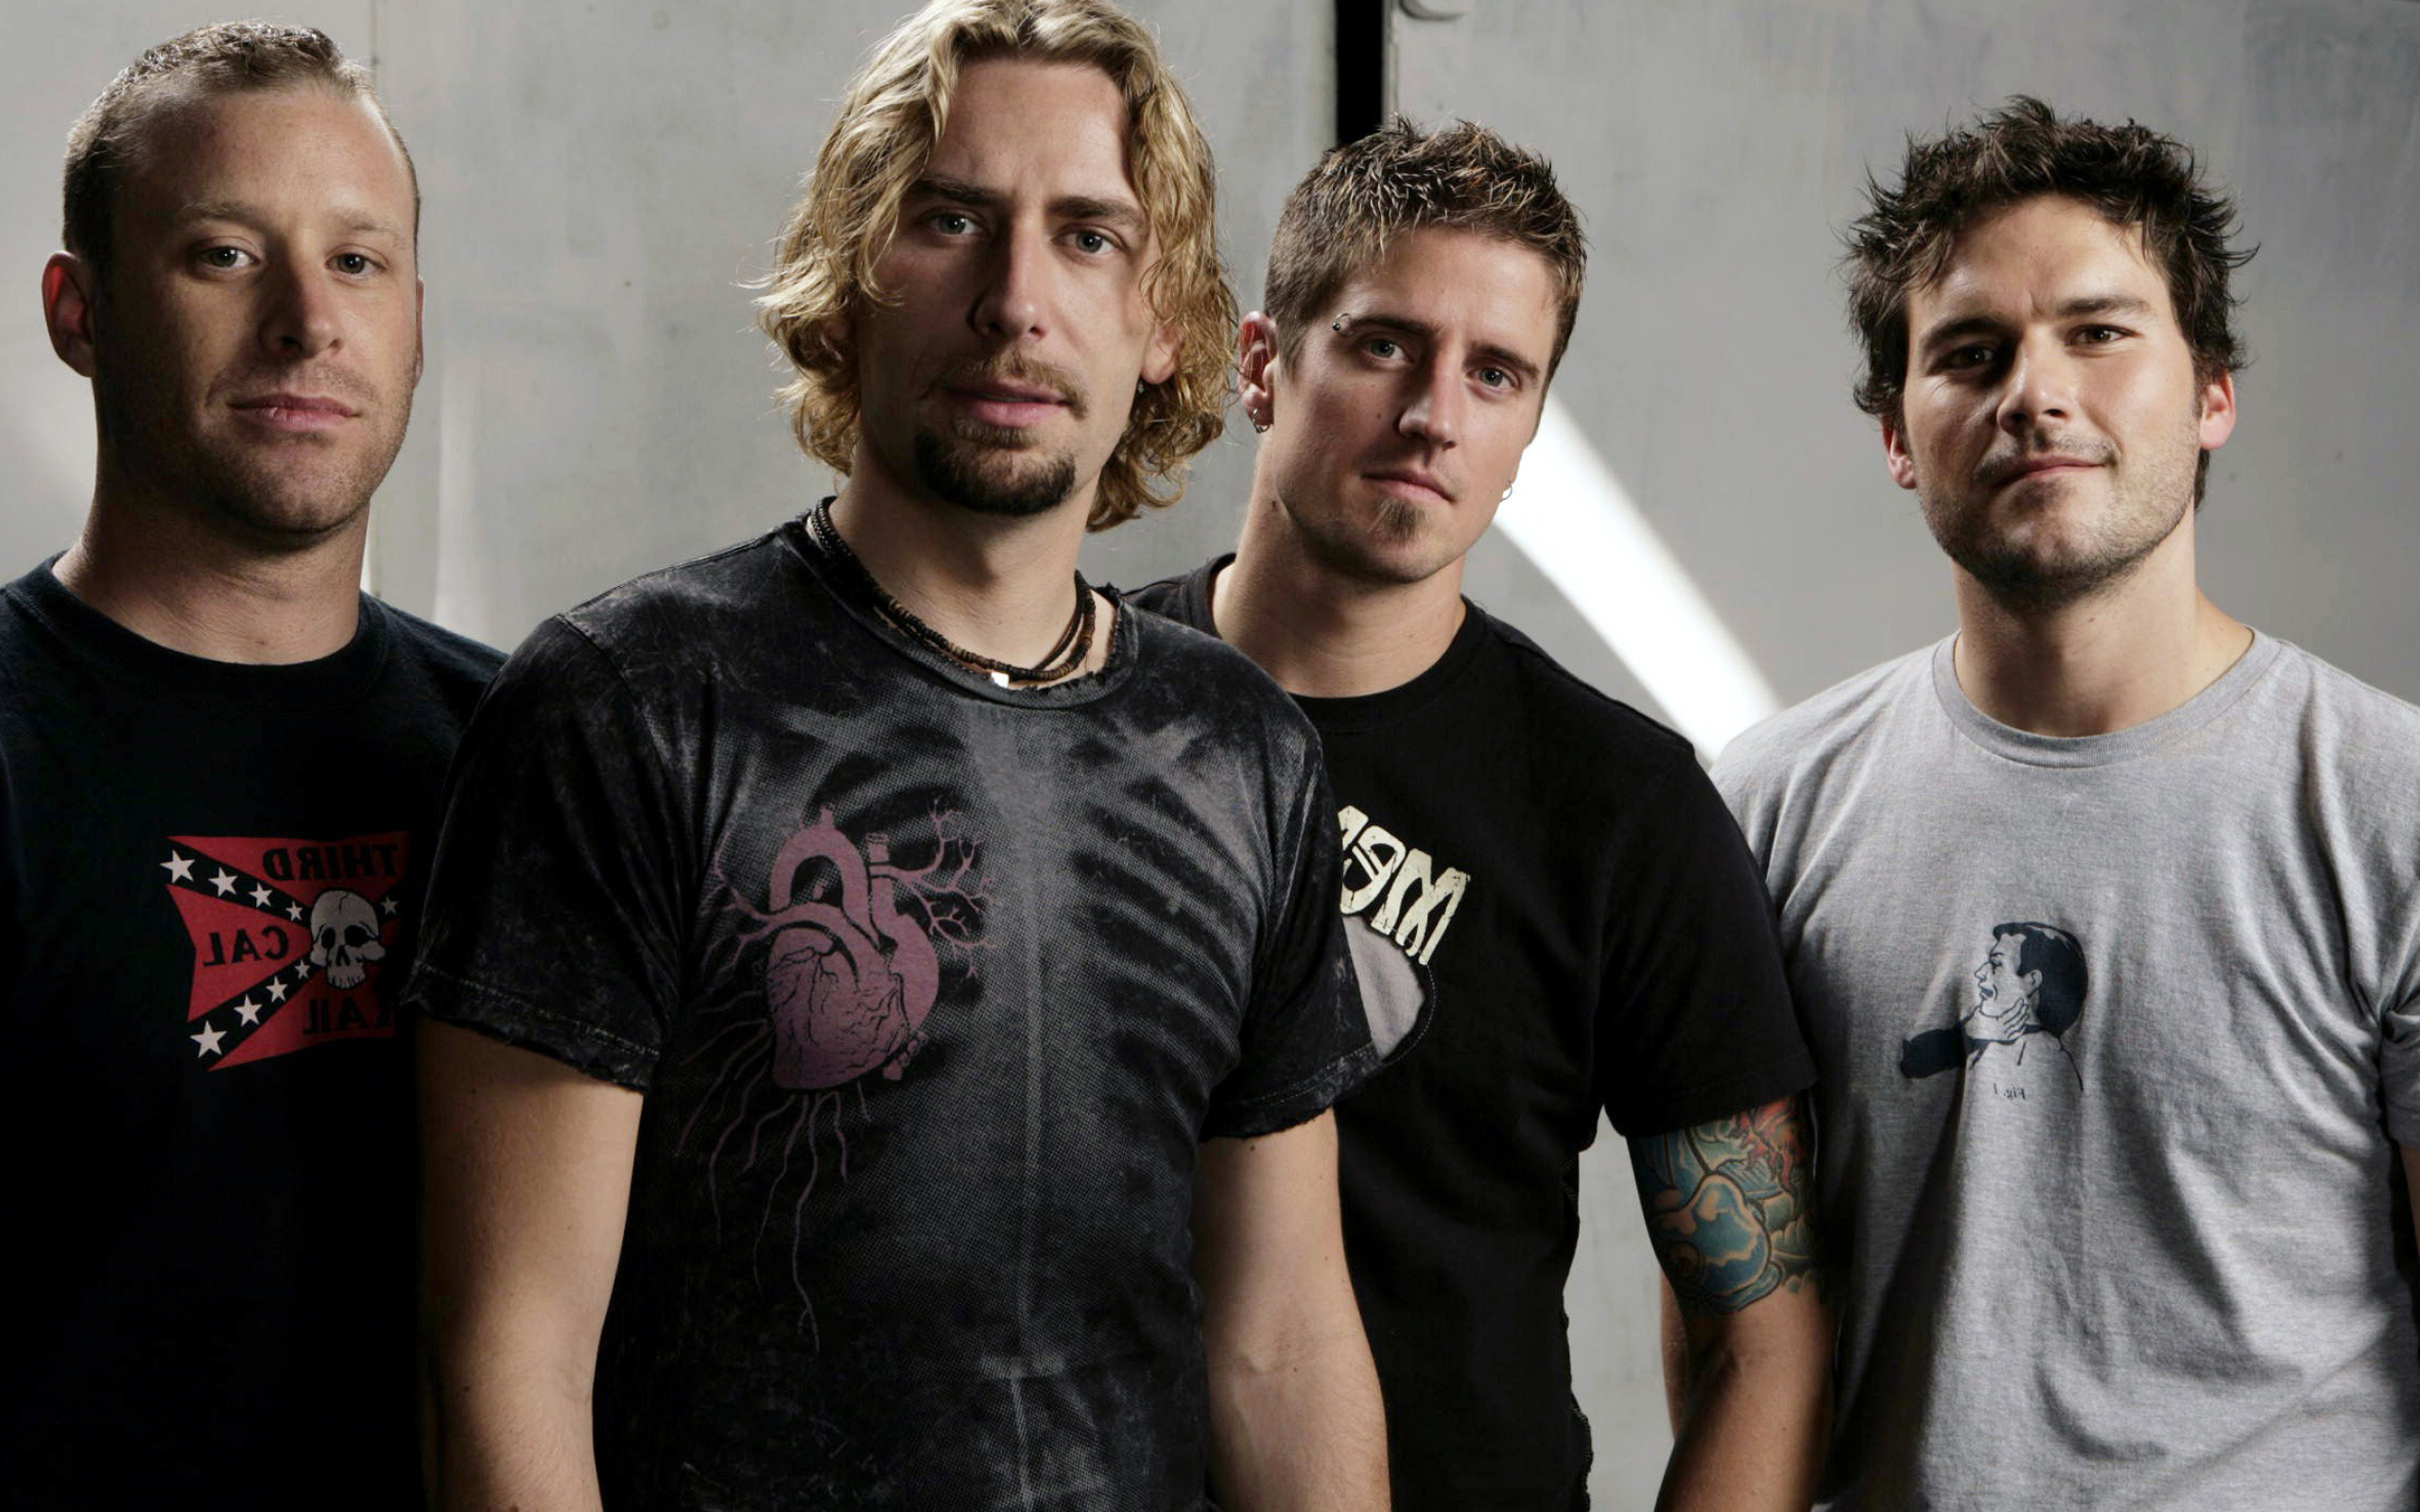 Nickelback: All the Right Reasons, The band's best-selling album to date, 2005. 2560x1600 HD Wallpaper.